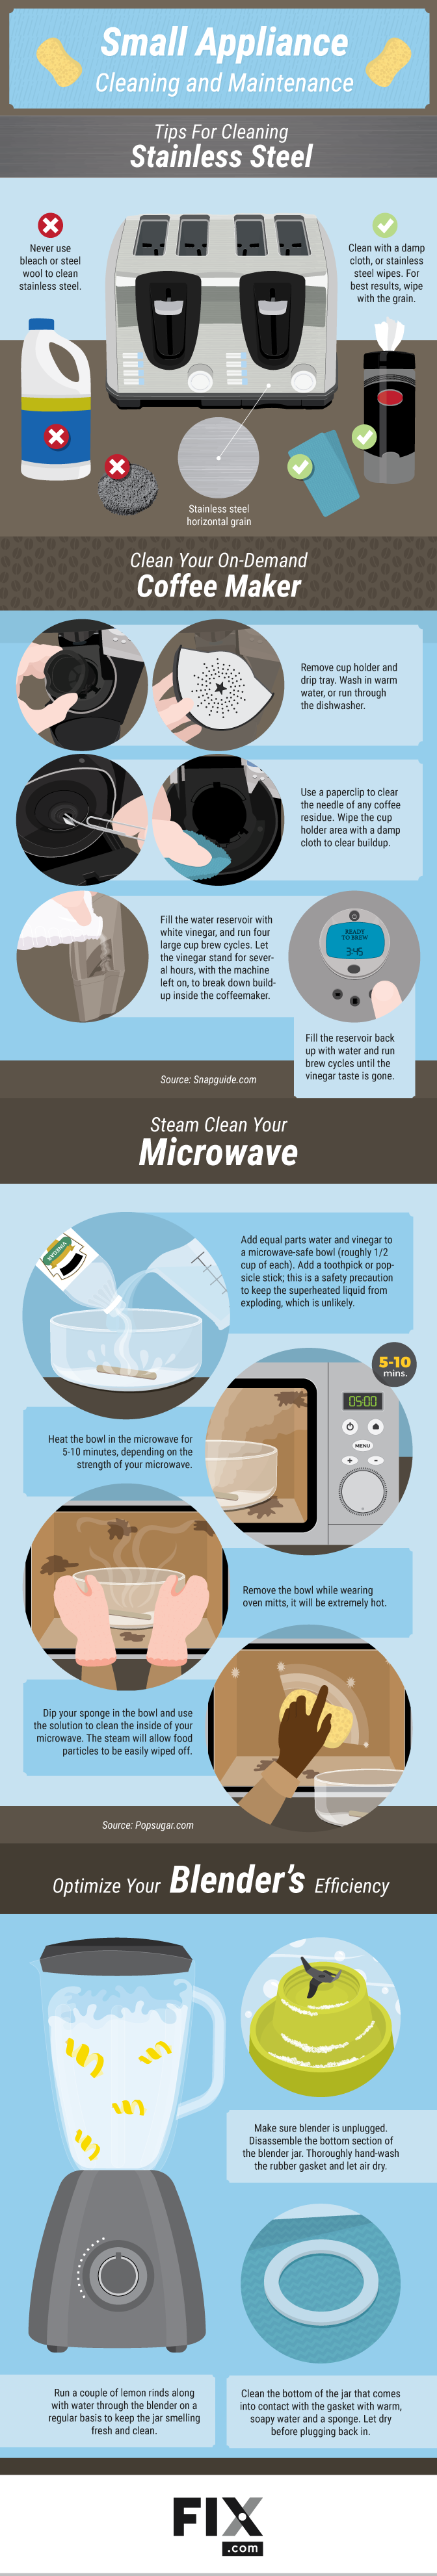 How to Clean Your Countertop Appliances #infographic